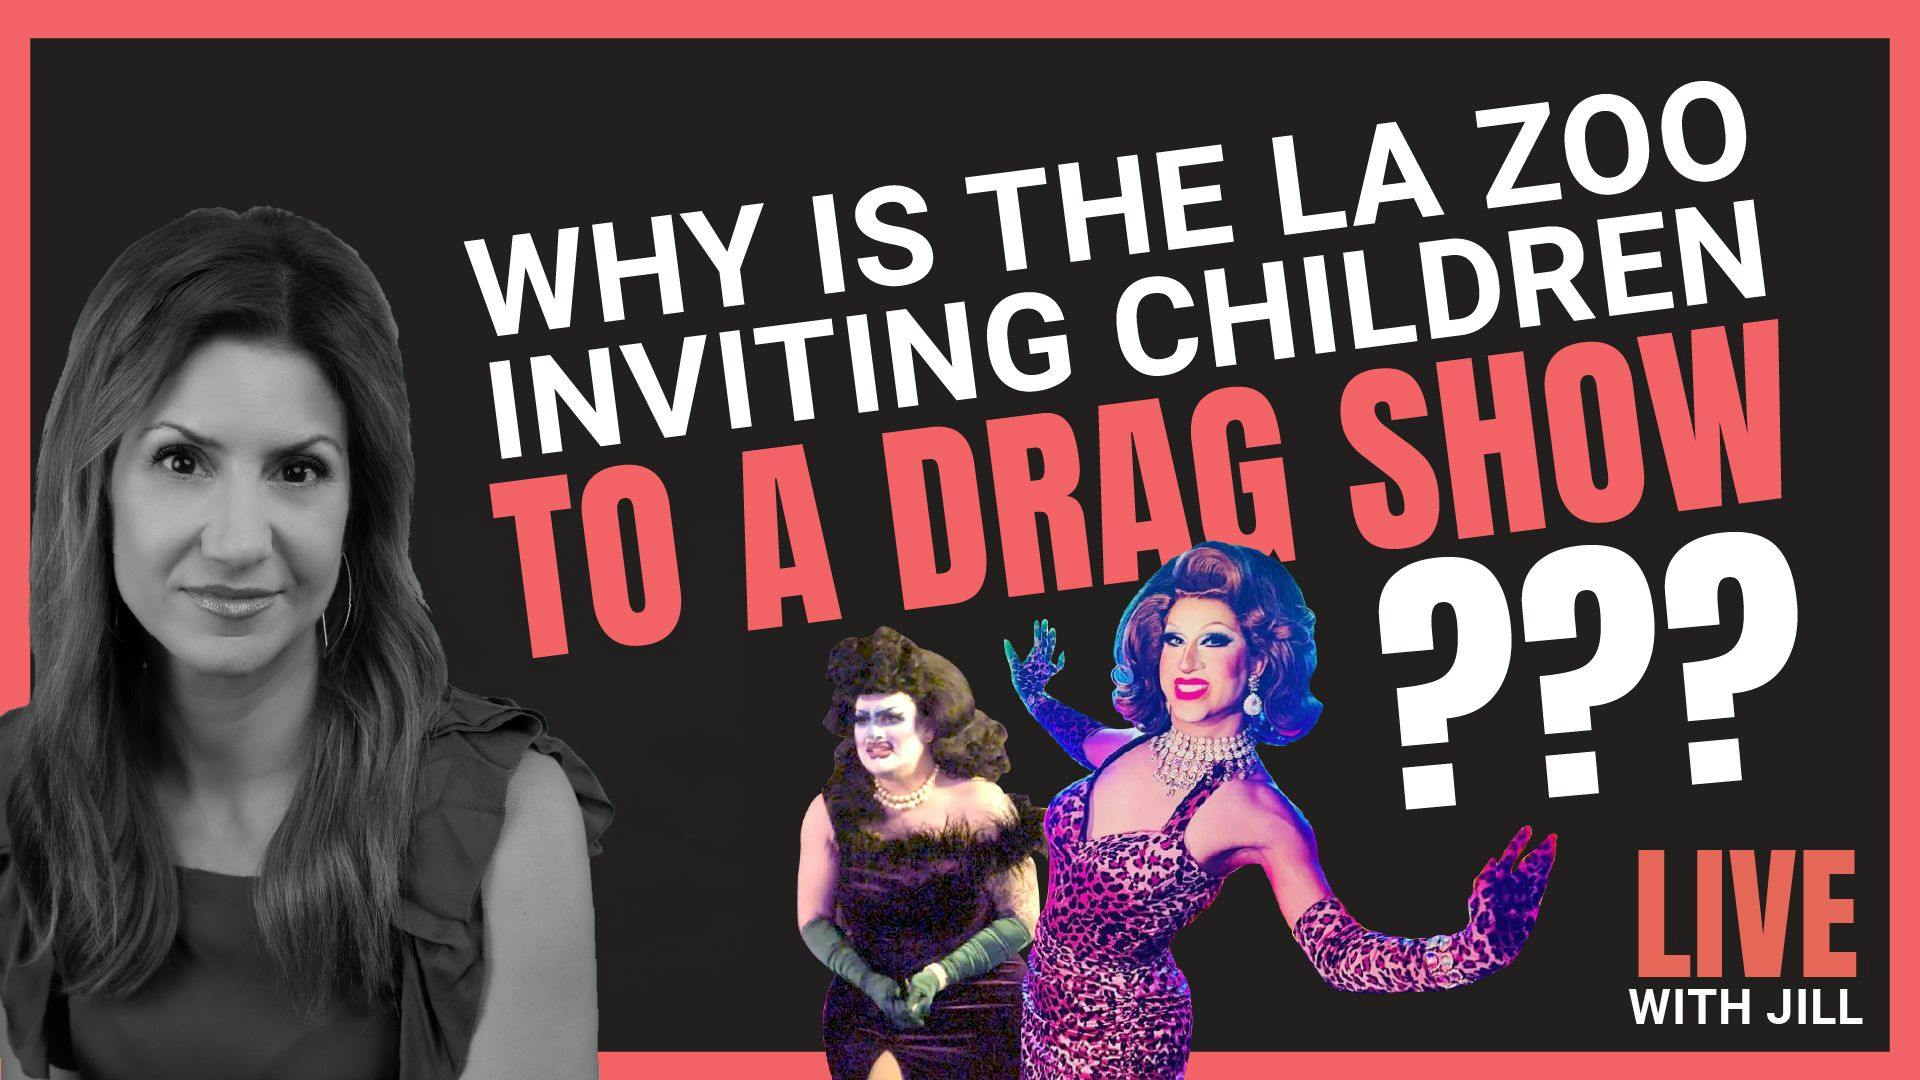 Why Is the LA Zoo Inviting Children to a Drag Show?